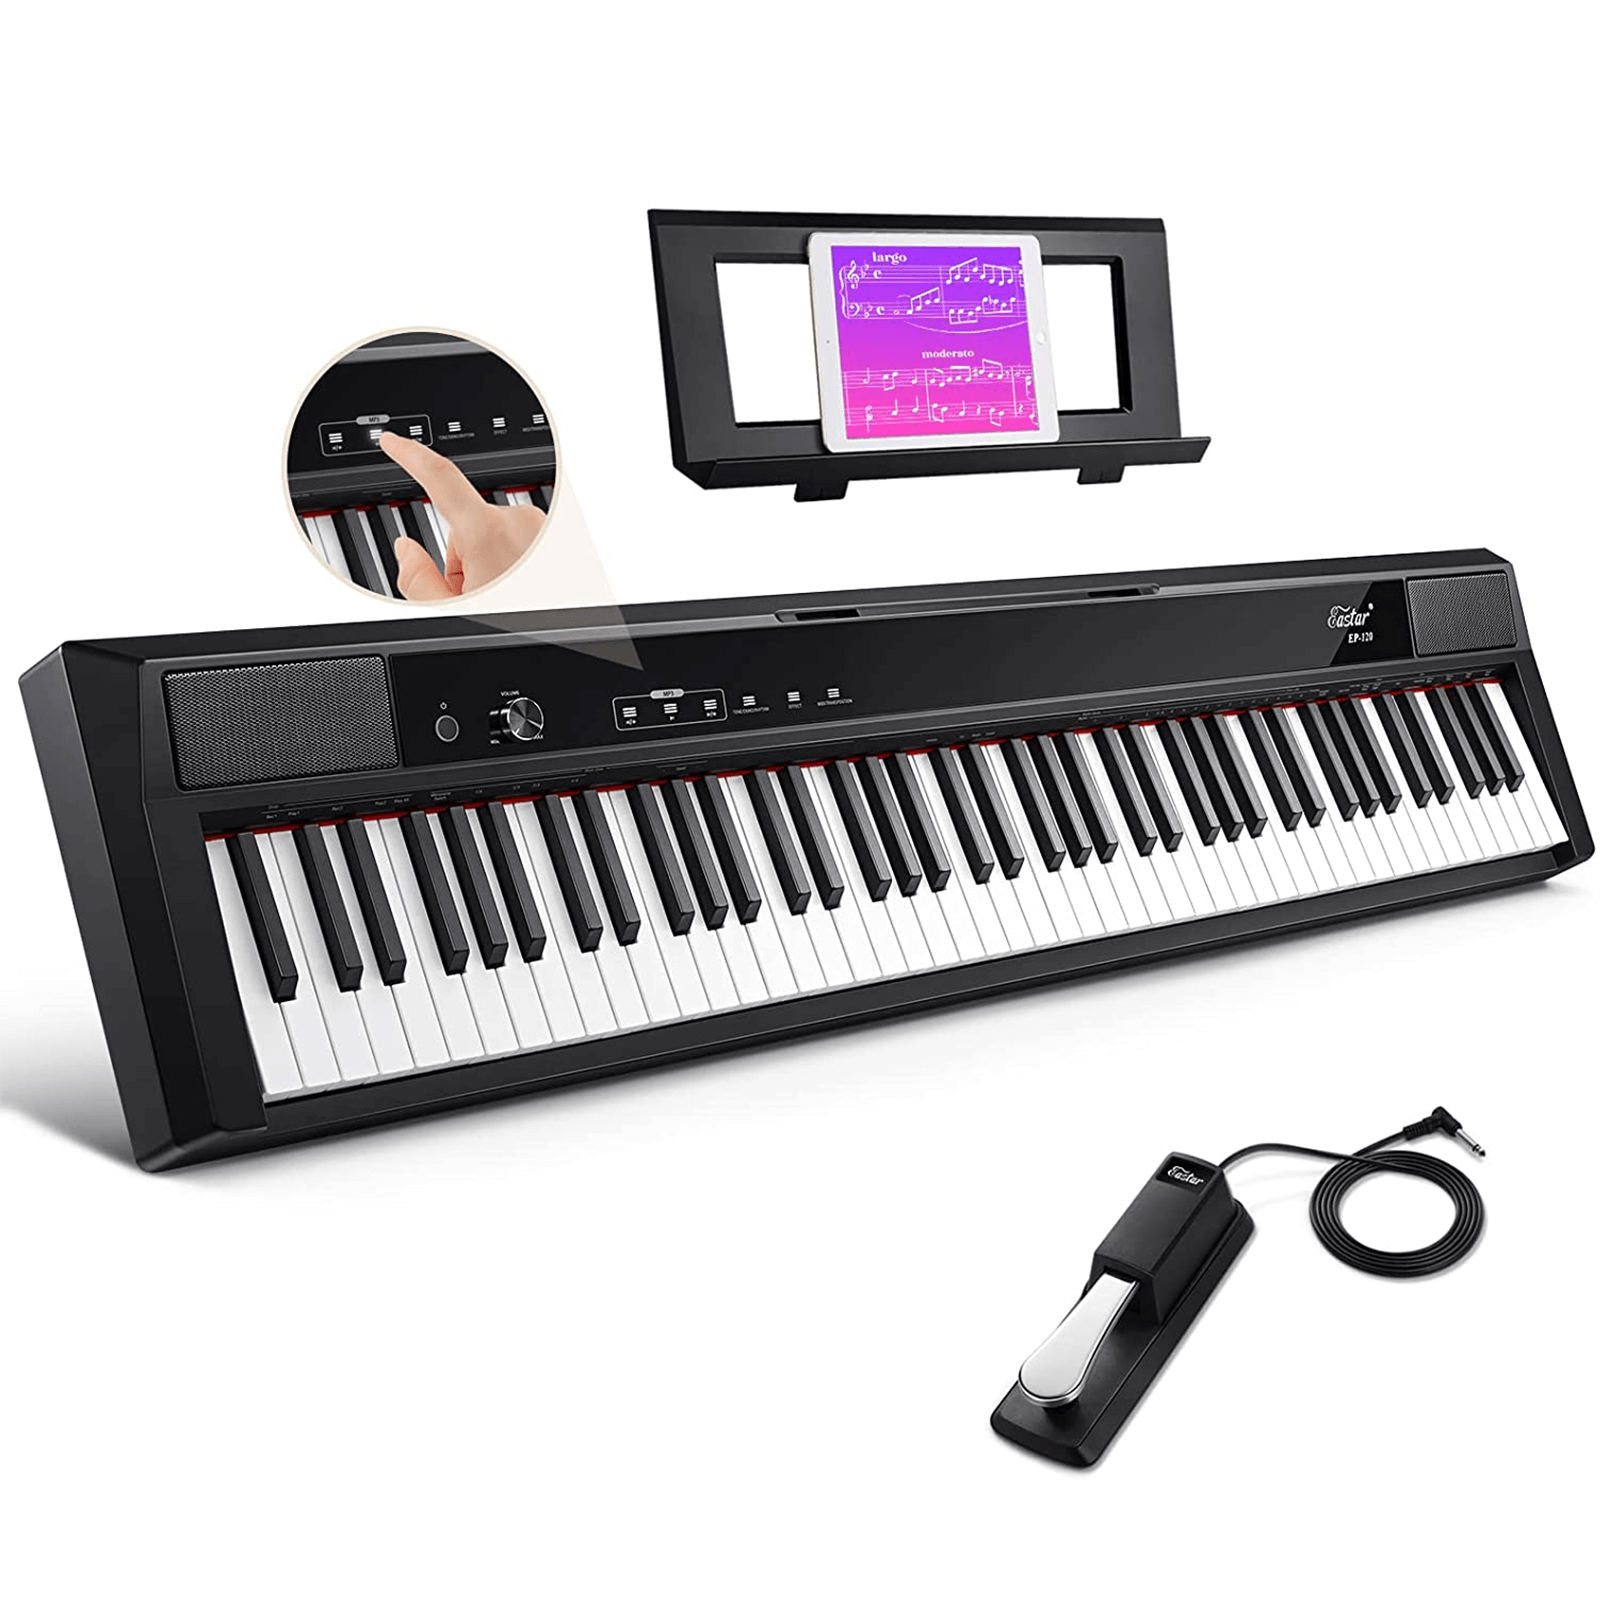 

Eastar EP-120 Portable 88-Key Weighted Digital Piano with Touchscreen & Sustain Pedal for Beginner